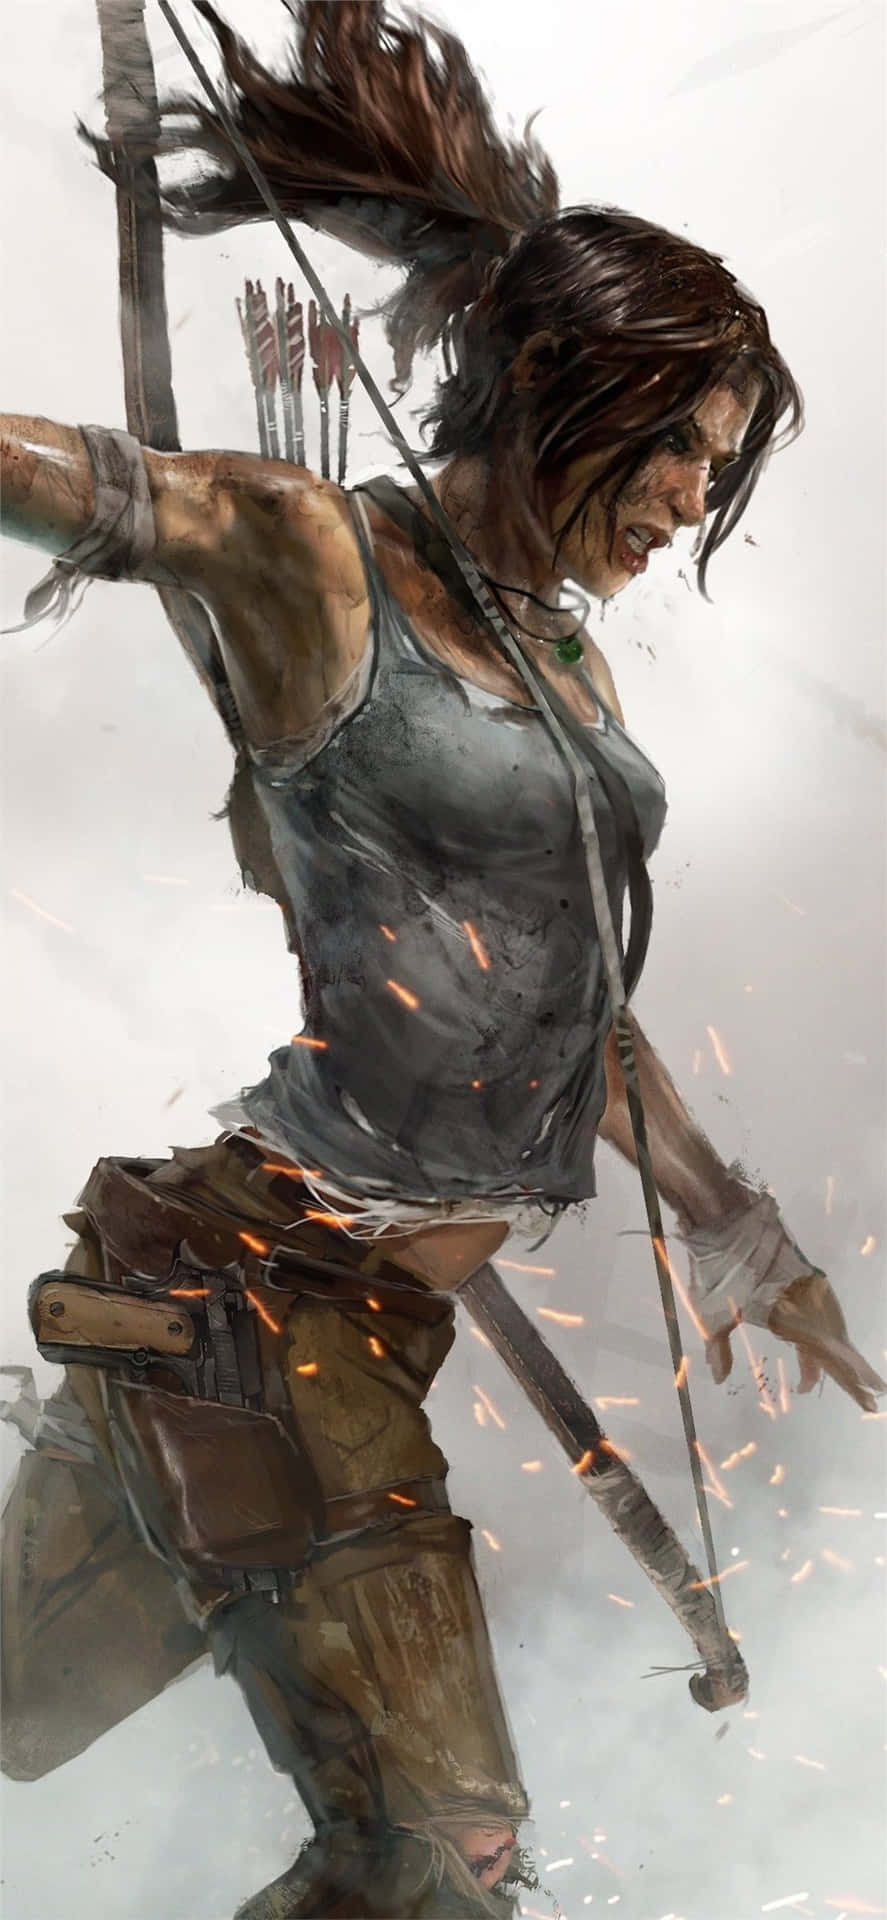 Embark on a thrilling adventure in Tomb Raider Wallpaper